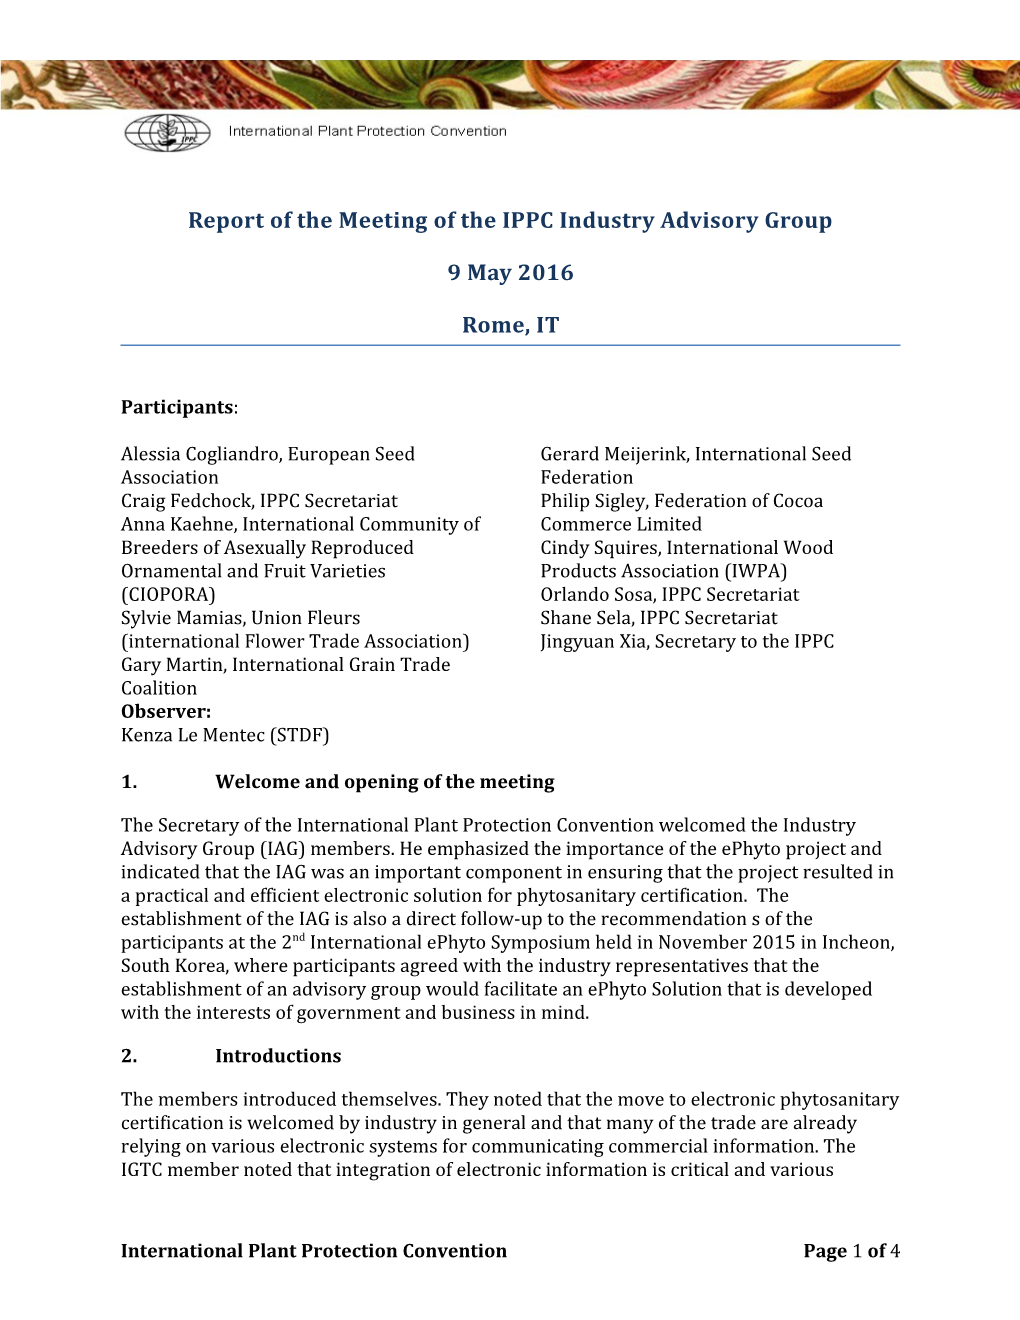 Report of the Meeting of the IPPC Industry Advisorygroup